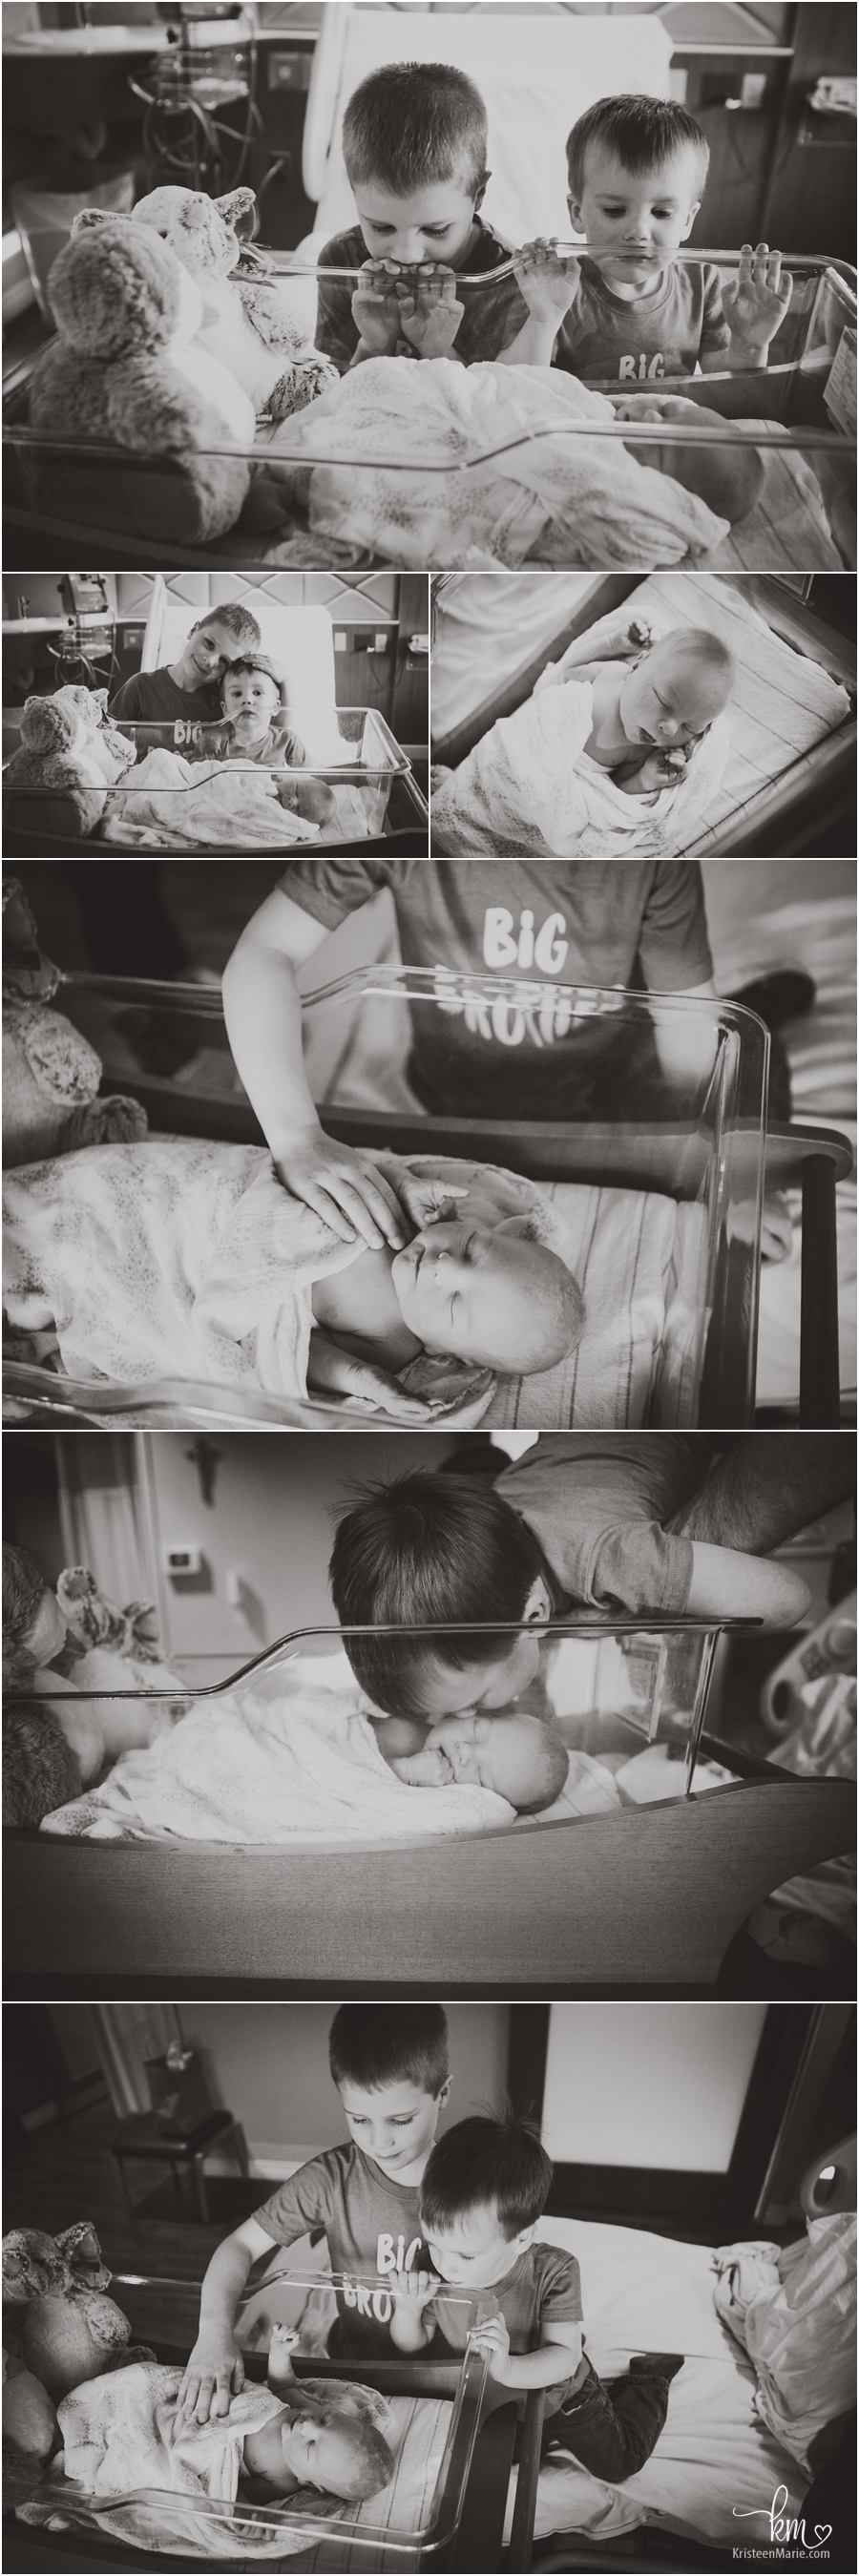 black and white images of meeting baby sibling for first time in hospital - Carmel Indiana Fresh 48 session